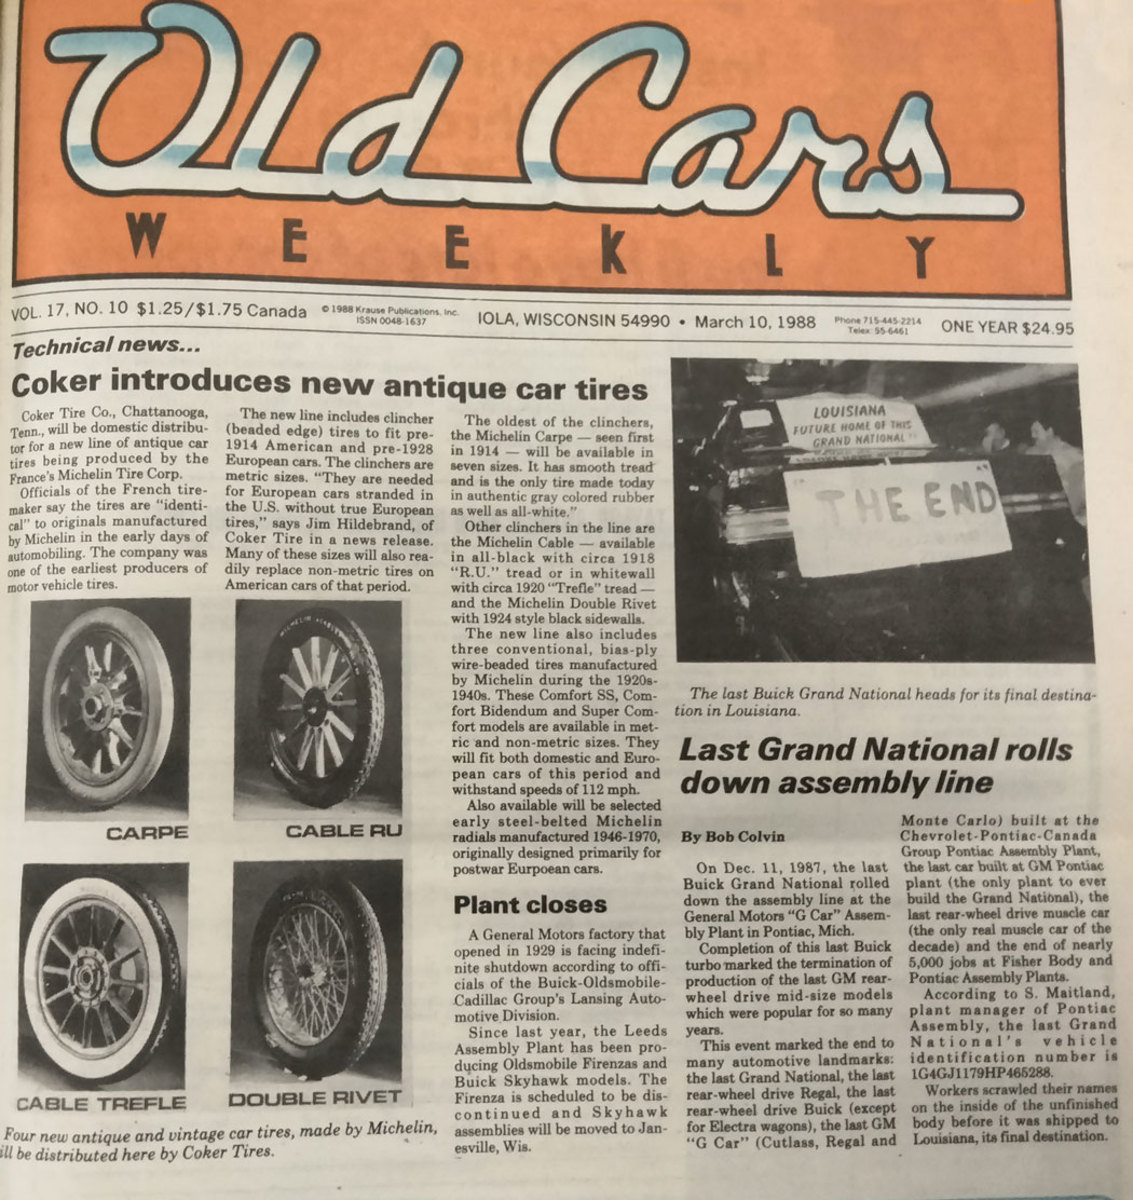 Colvin’s article on his 1987 Buick Grand National, the last G-body General Motors car to be built, from the March 10, 1988, Old Cars Weekly. He was a longtime GN fan, having owned a GNX and raced a turbo Regal T-Type.